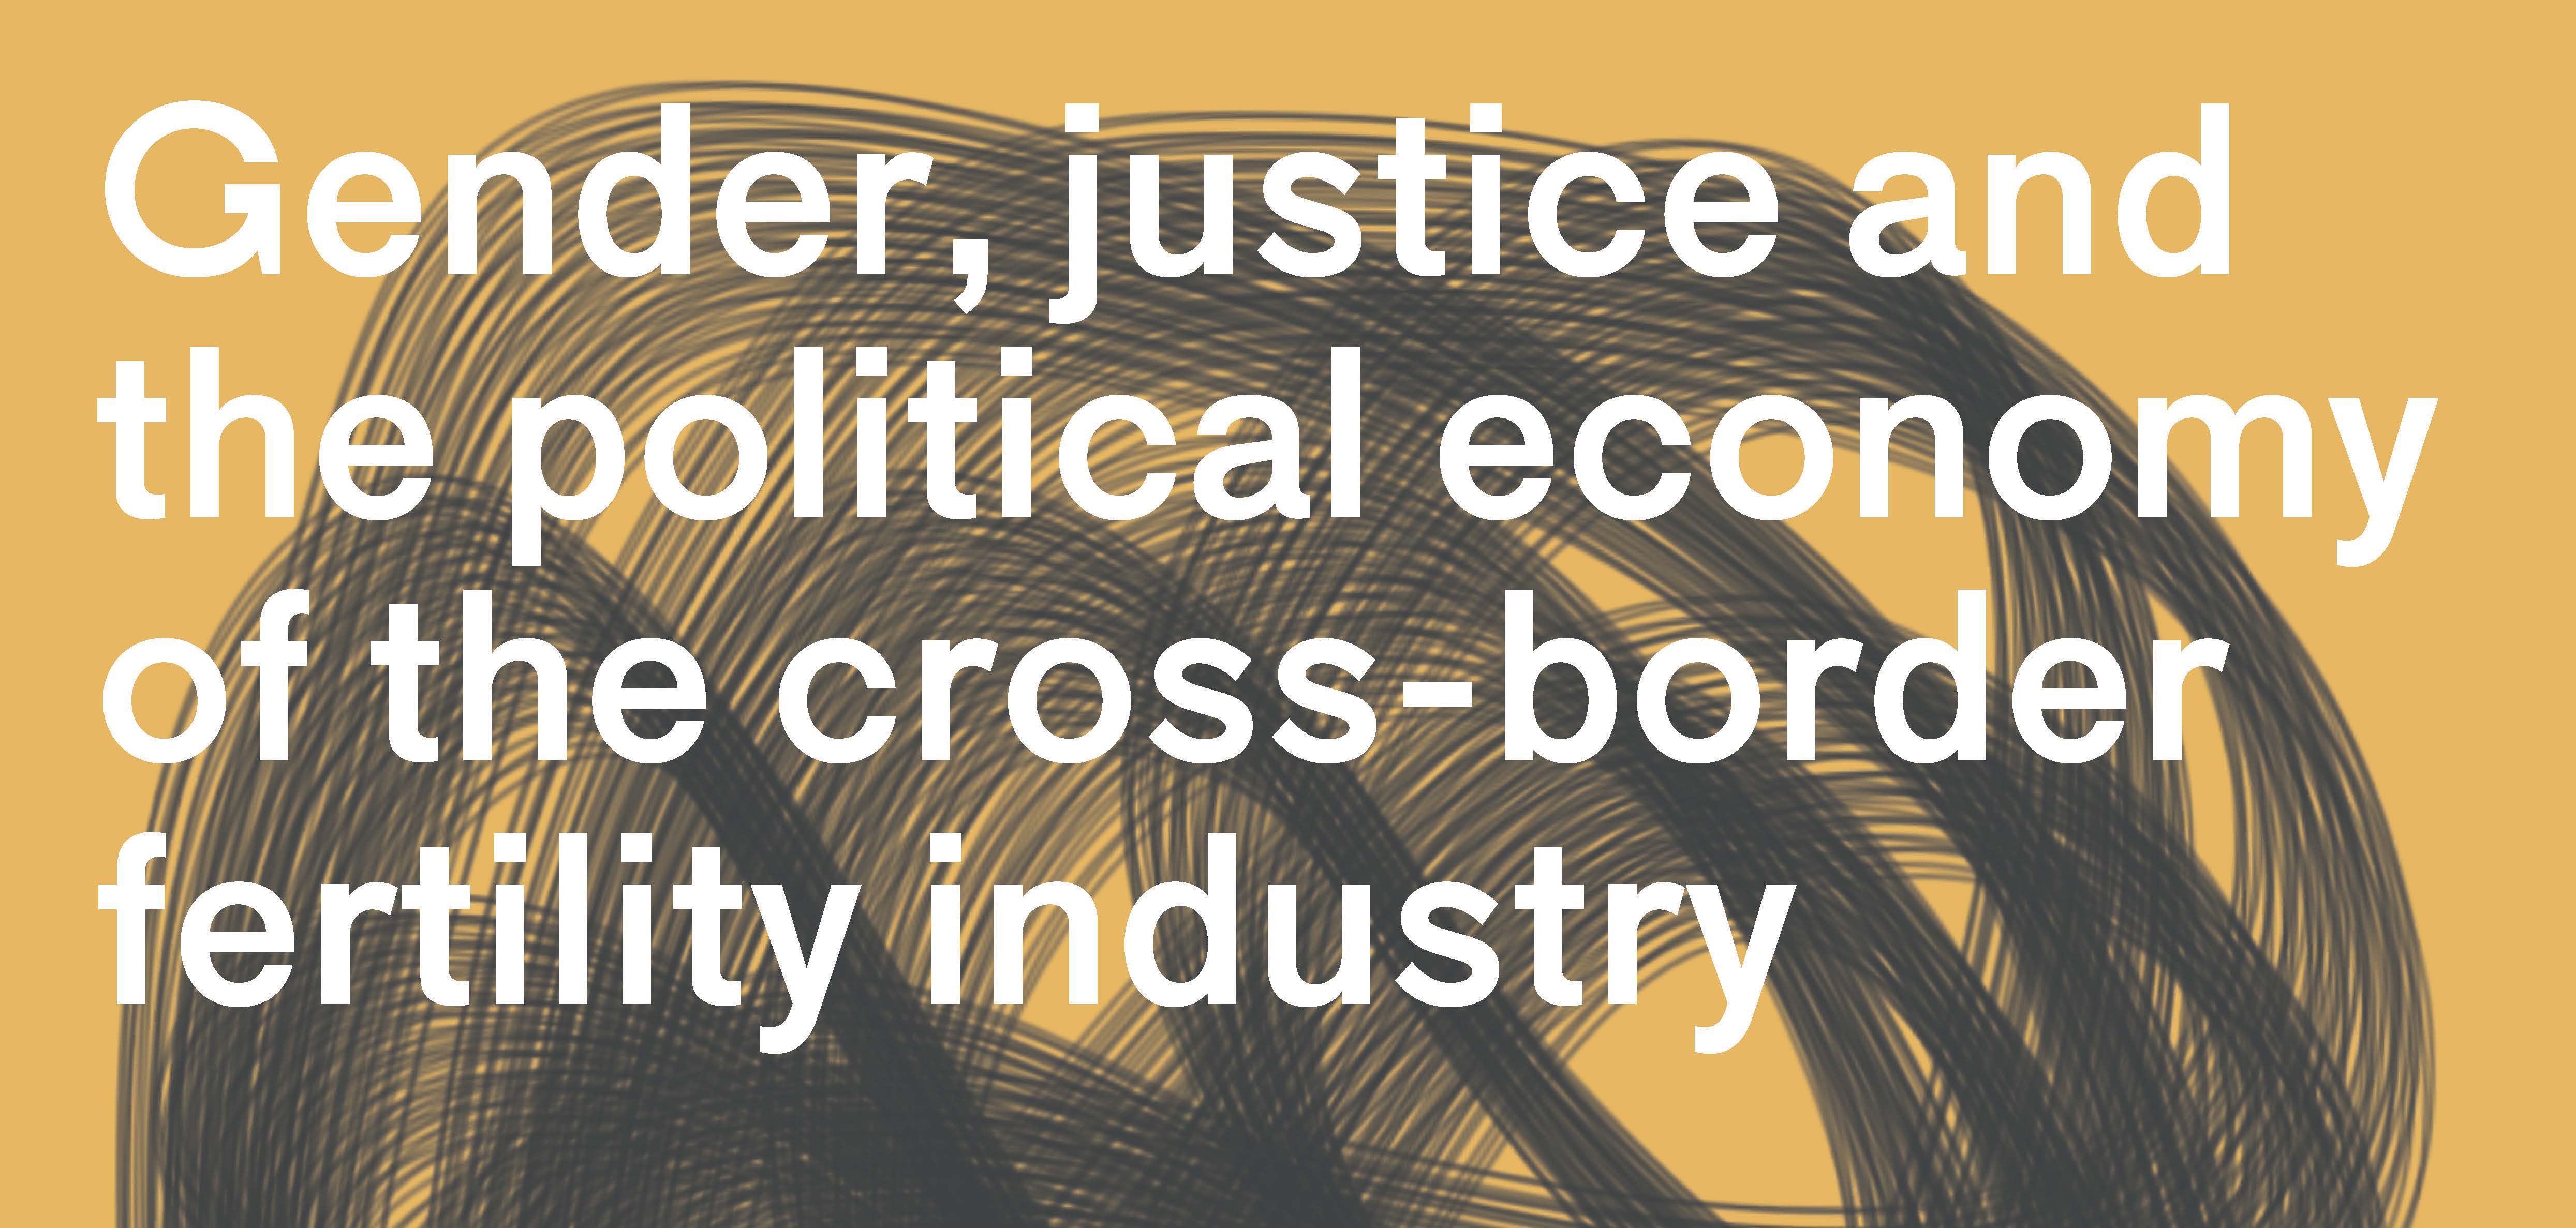 Gender, justice and the political economy of the cross-border fertility industry